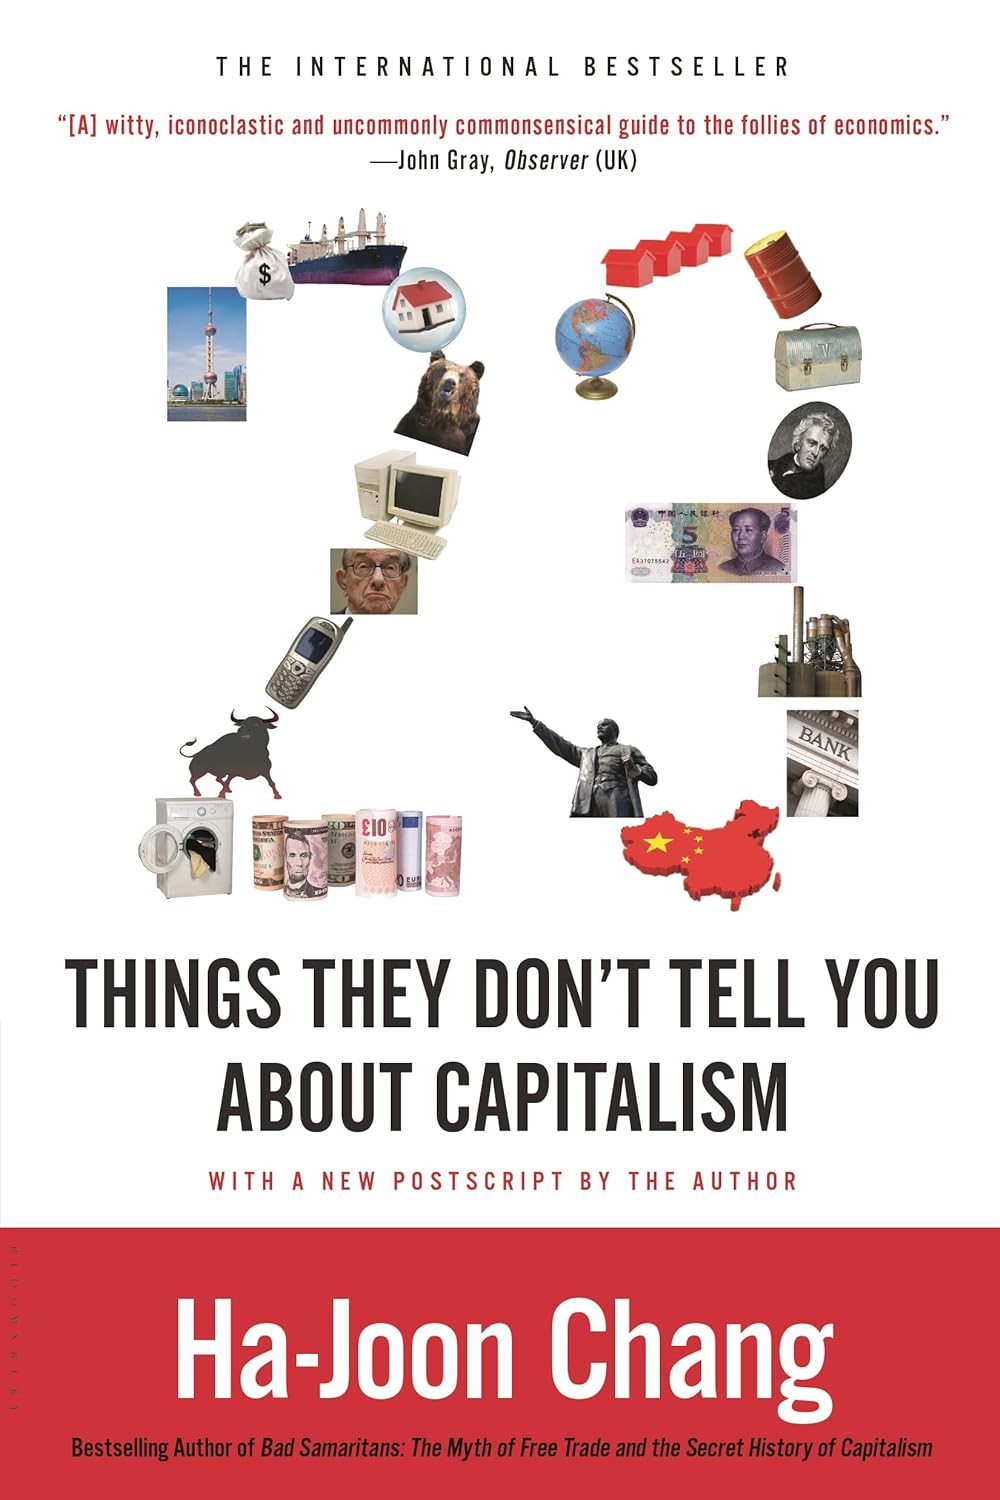 Summary: 23 Things They Don't Tell You About Capitalism